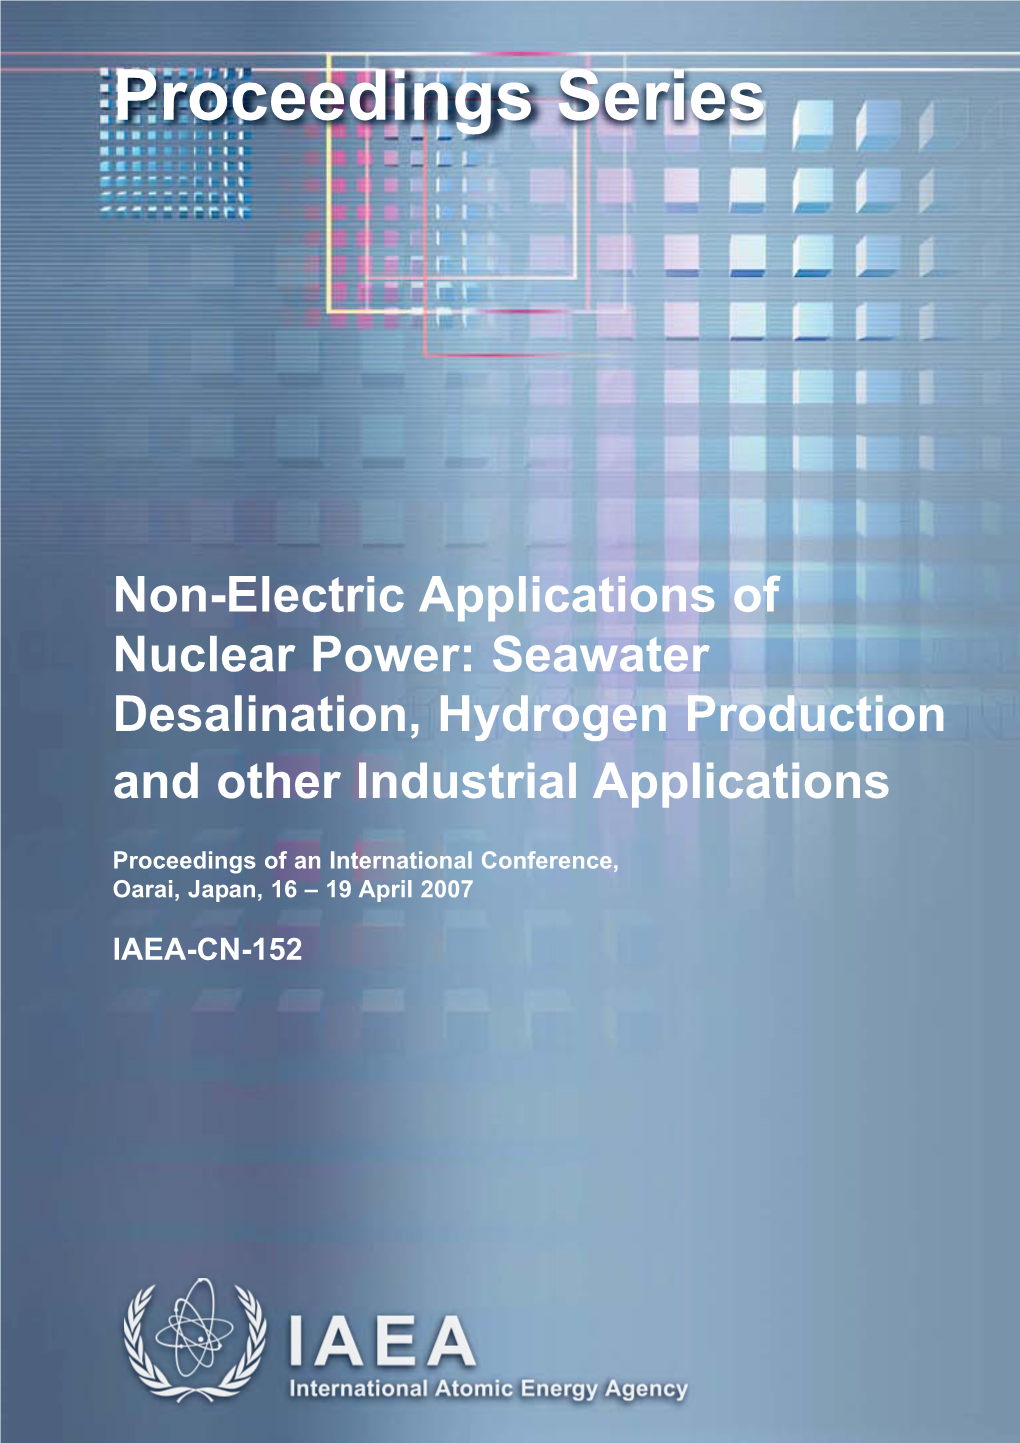 Non-Electric Applications of Nuclear Power: Seawater Desalination, Hydrogen Production and Other Industrial Applications